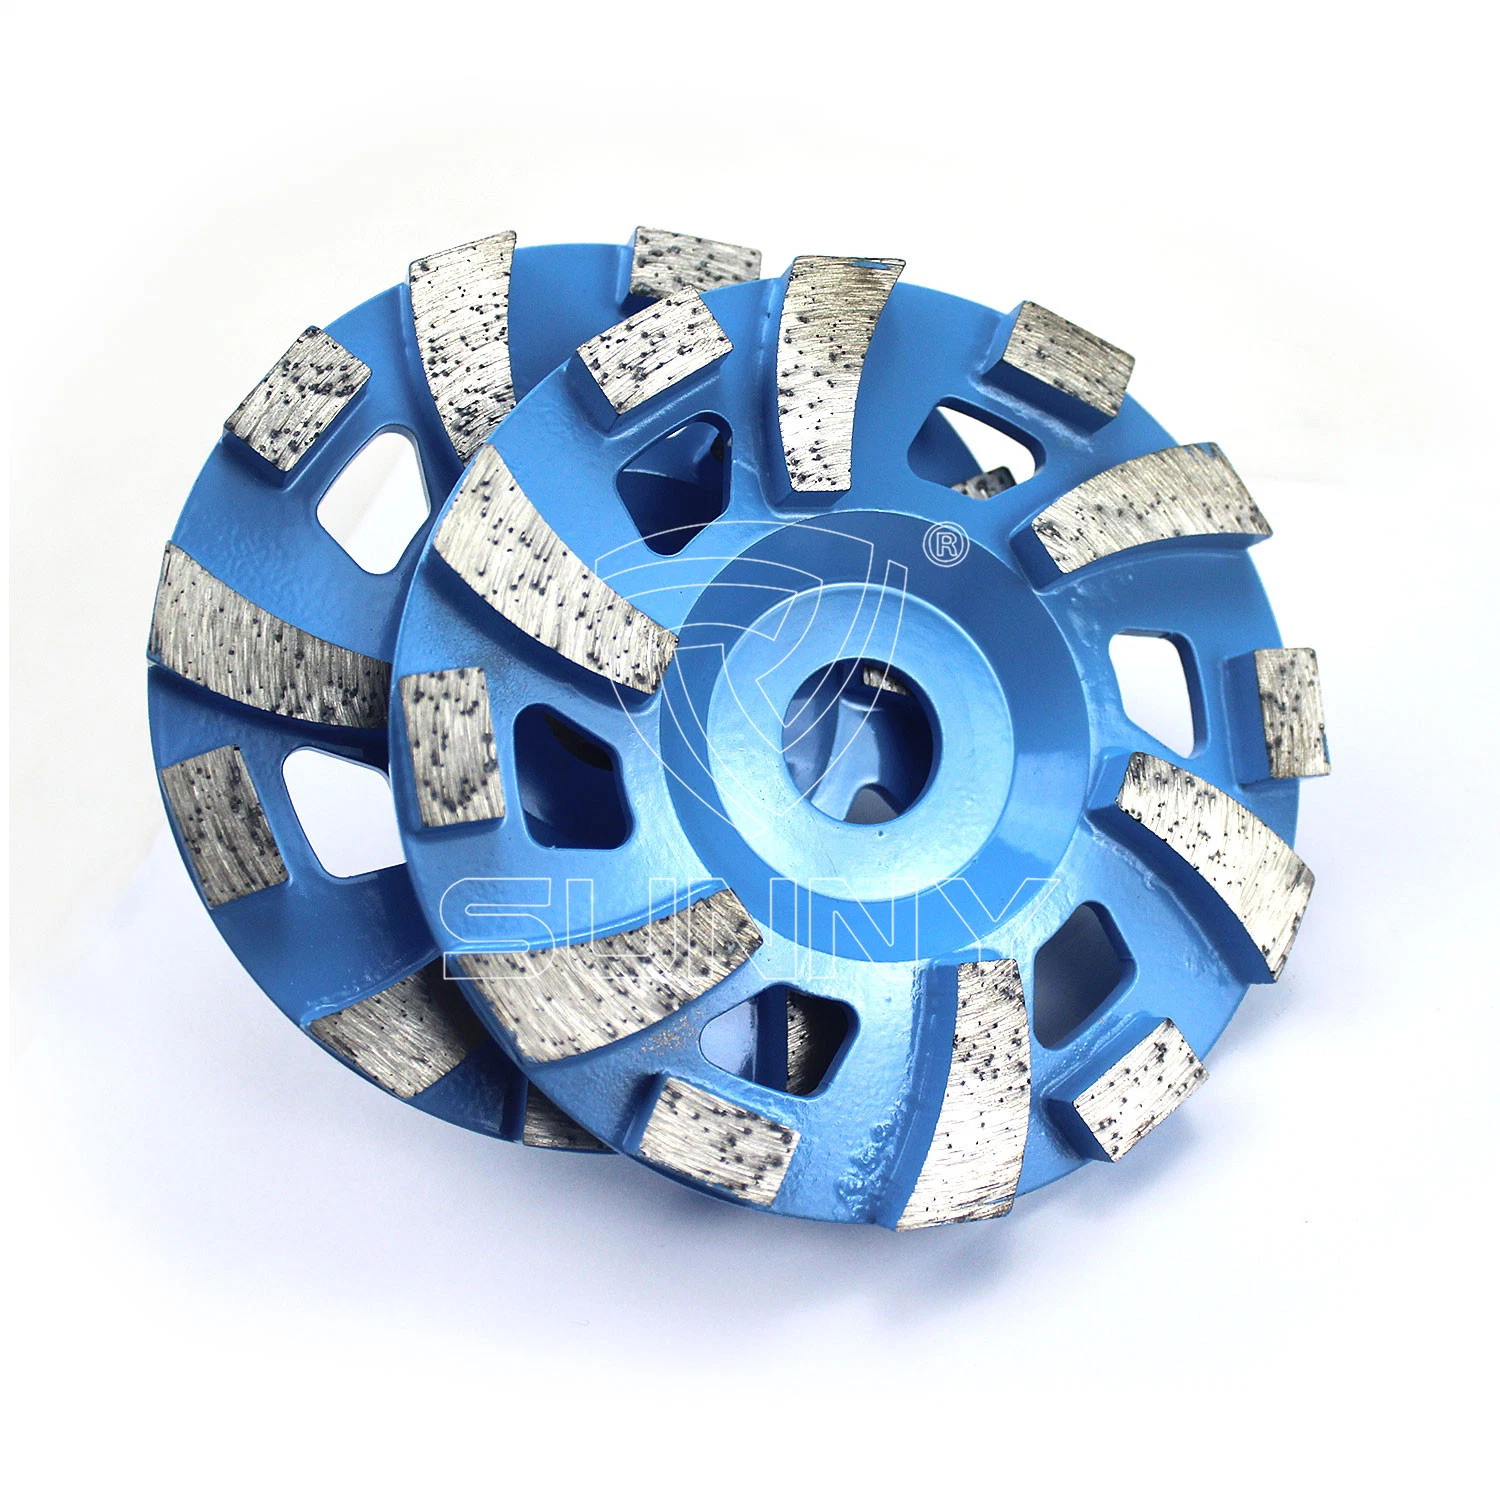 125mm Diamond Cup Wheel for Grinding